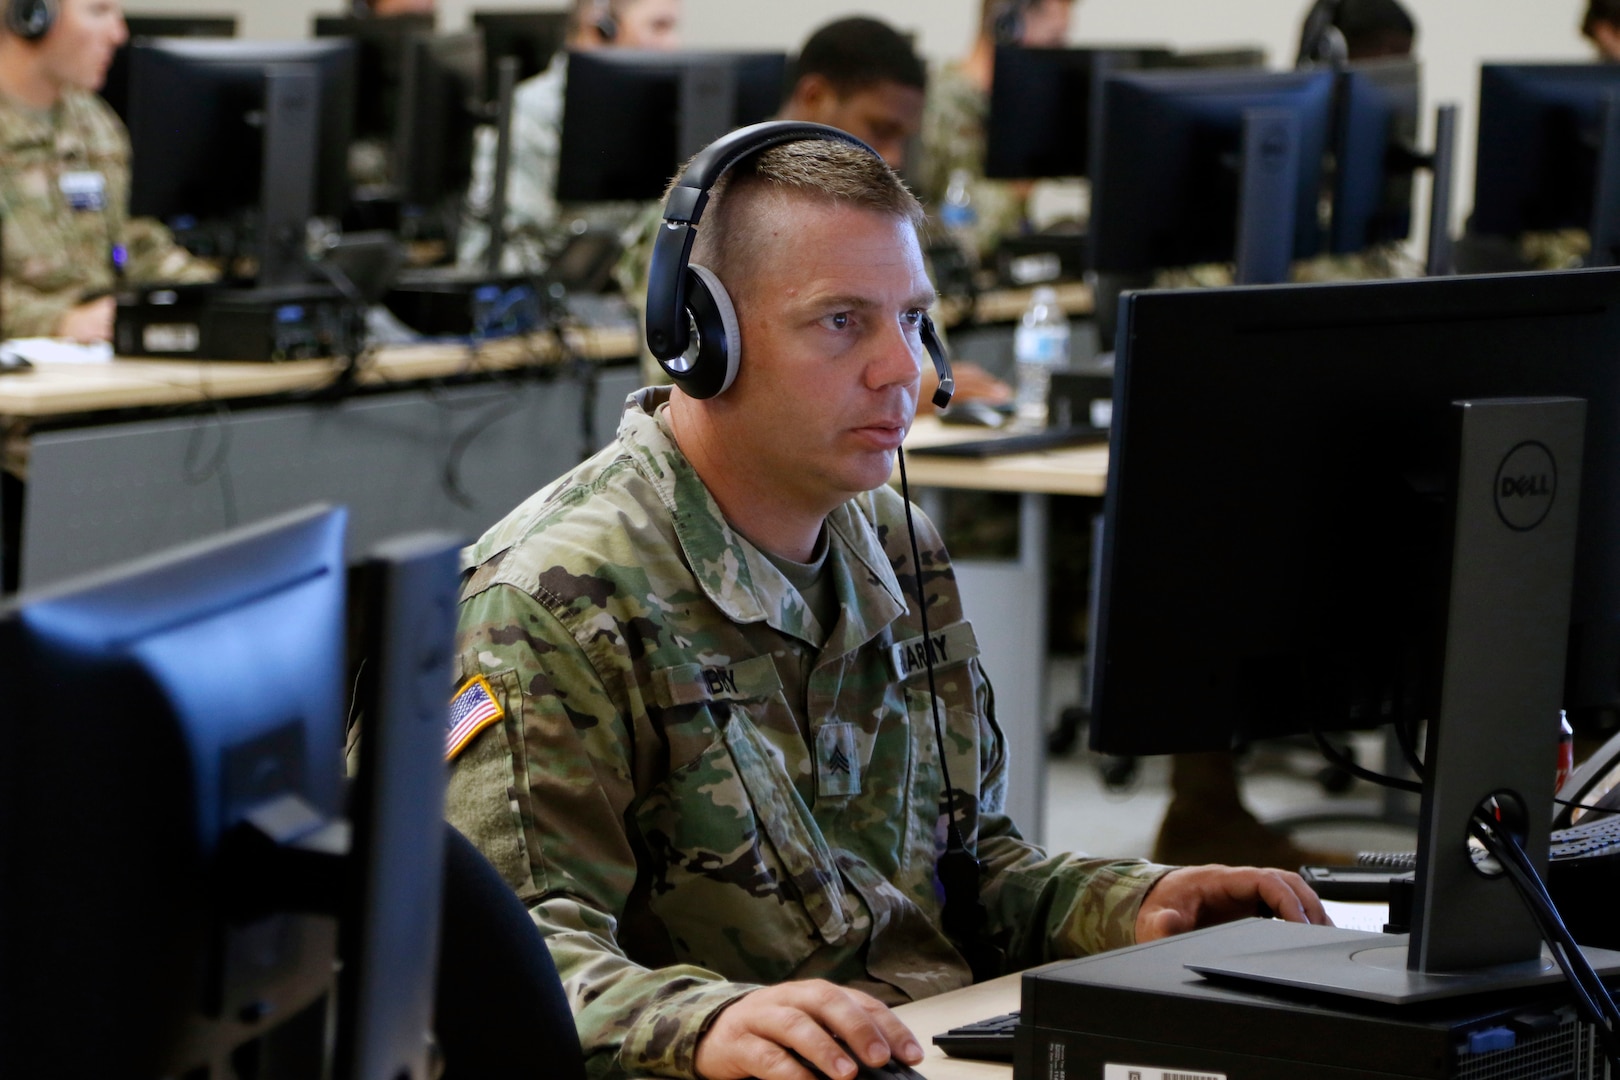 Soldiers with the 116th Army Band, Georgia Army National Guard, along with Airmen from both the 116th Airlift Wing and 165th Air Control Wing, operate a call center that helps facilitate testing through the Augusta University ExpressCare cellphone app. The Soldiers in the call center pull information from a database pool and help people experiencing possible COVID-19 symptoms find testing sites near them.